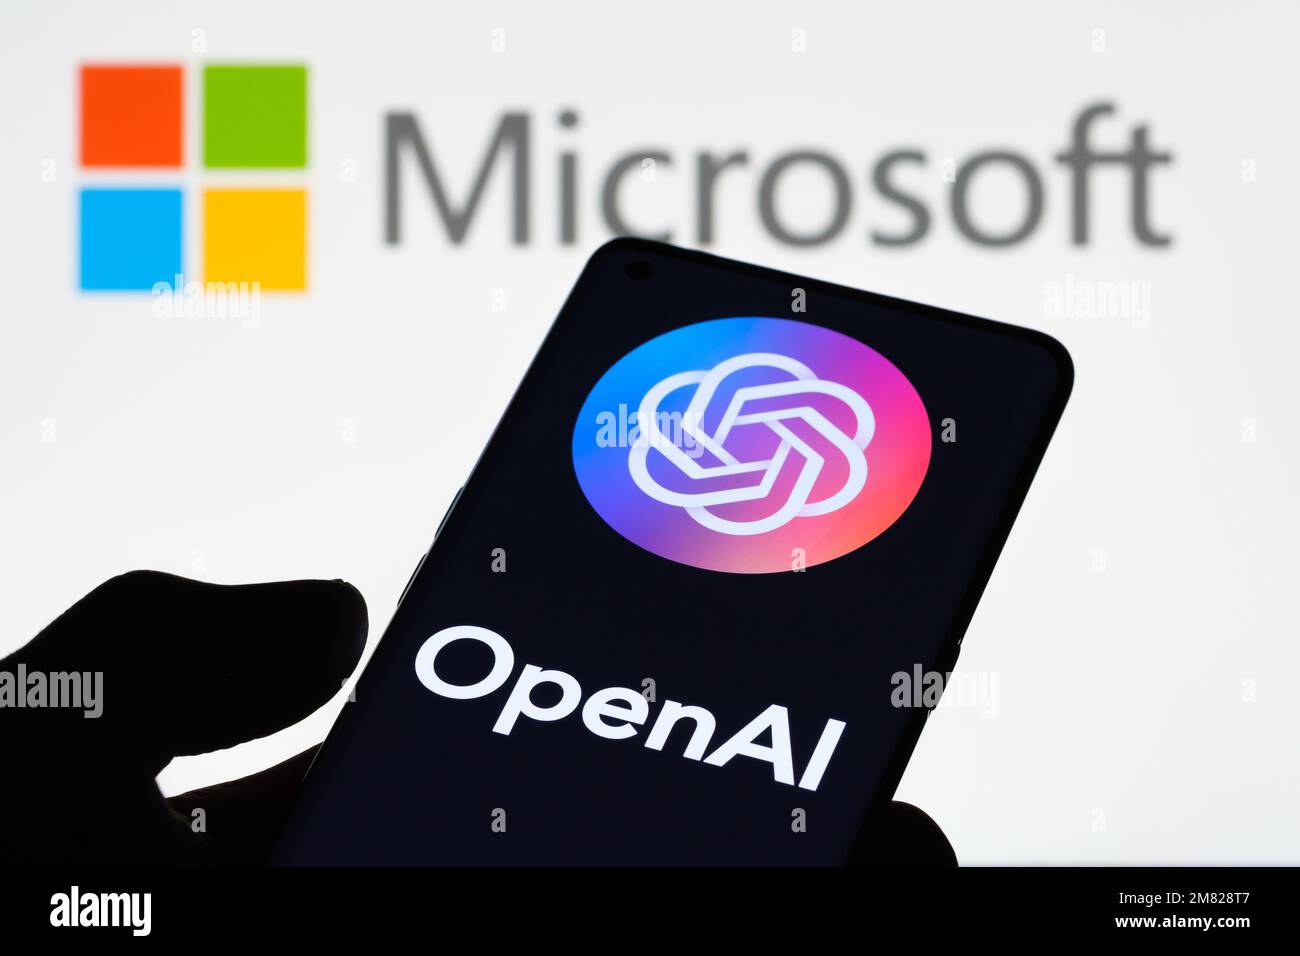 OPENAI logol seen on smartphone and laptop display with MICROSOFT logo on the background. Concept. Stafford, United Kingdom, January 11, 2023 Stock Photo